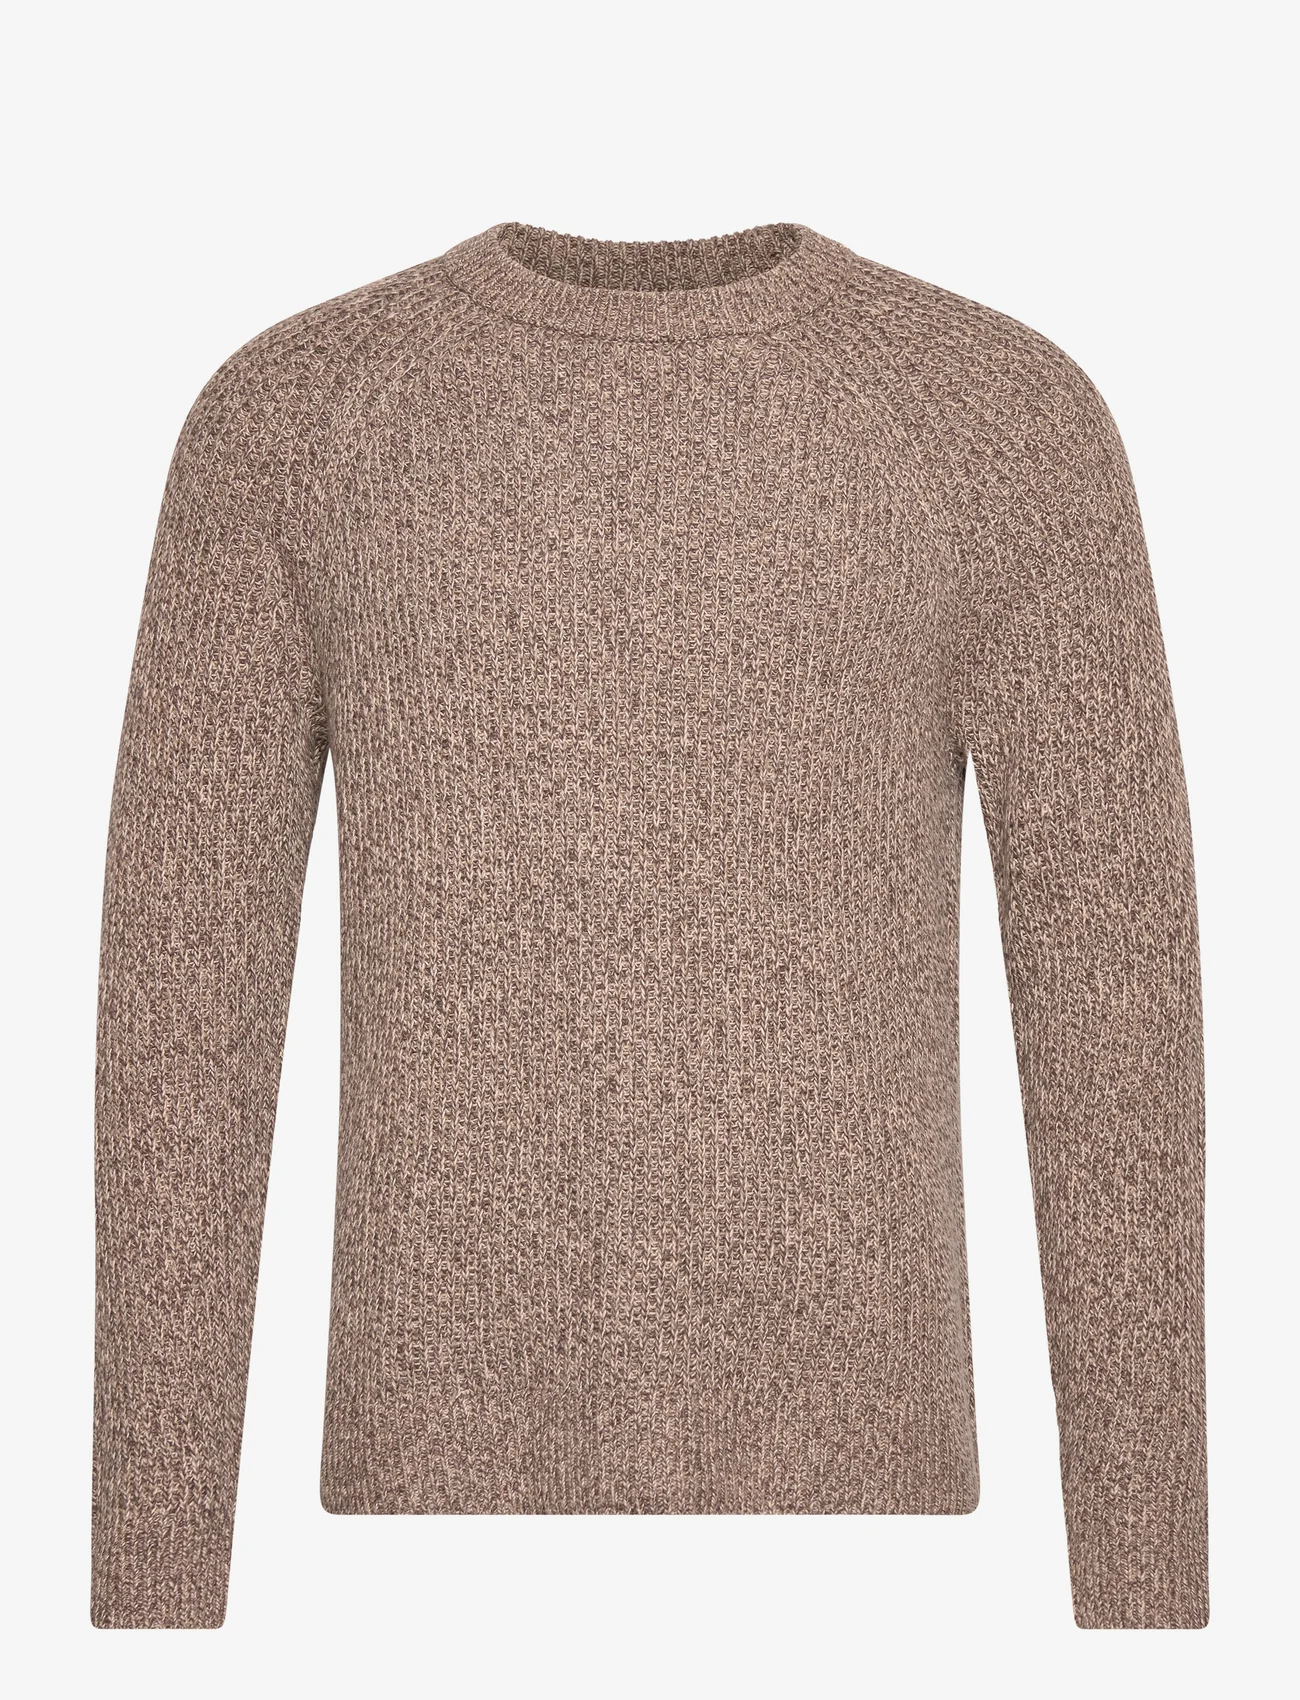 Abercrombie & Fitch - ANF MENS SWEATERS - megztinis su apvalios formos apykakle - brown marl - 0